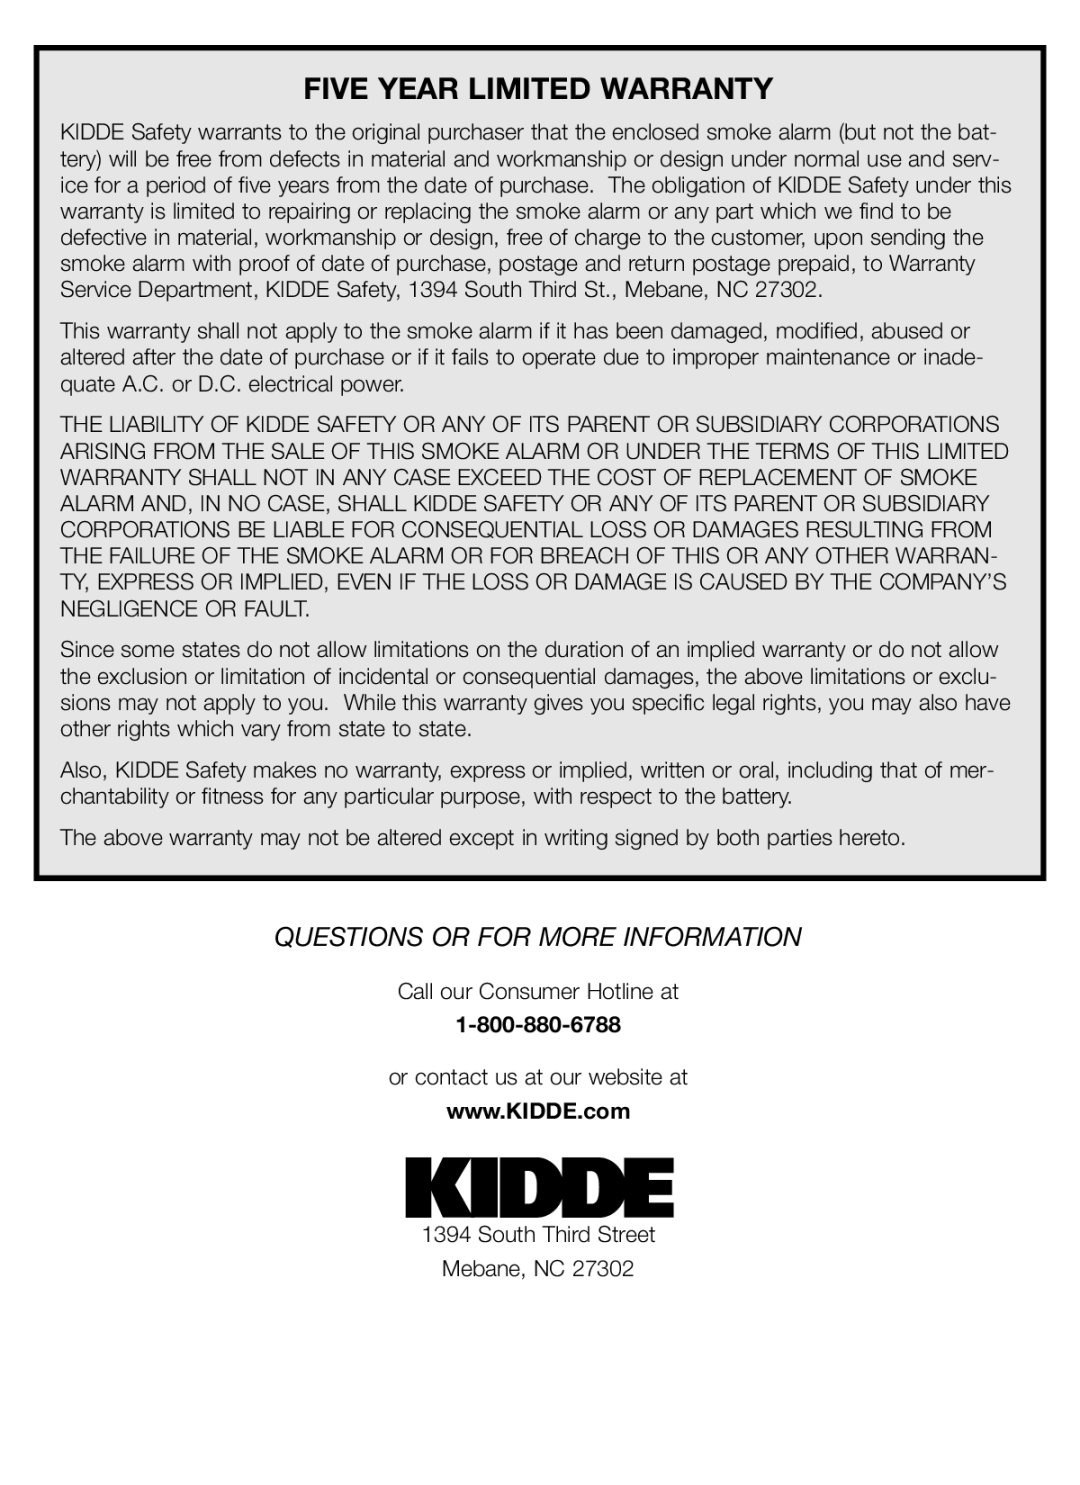 Kidde PI 2000 manual Five Year Limited Warranty, Questions Or For More Information 